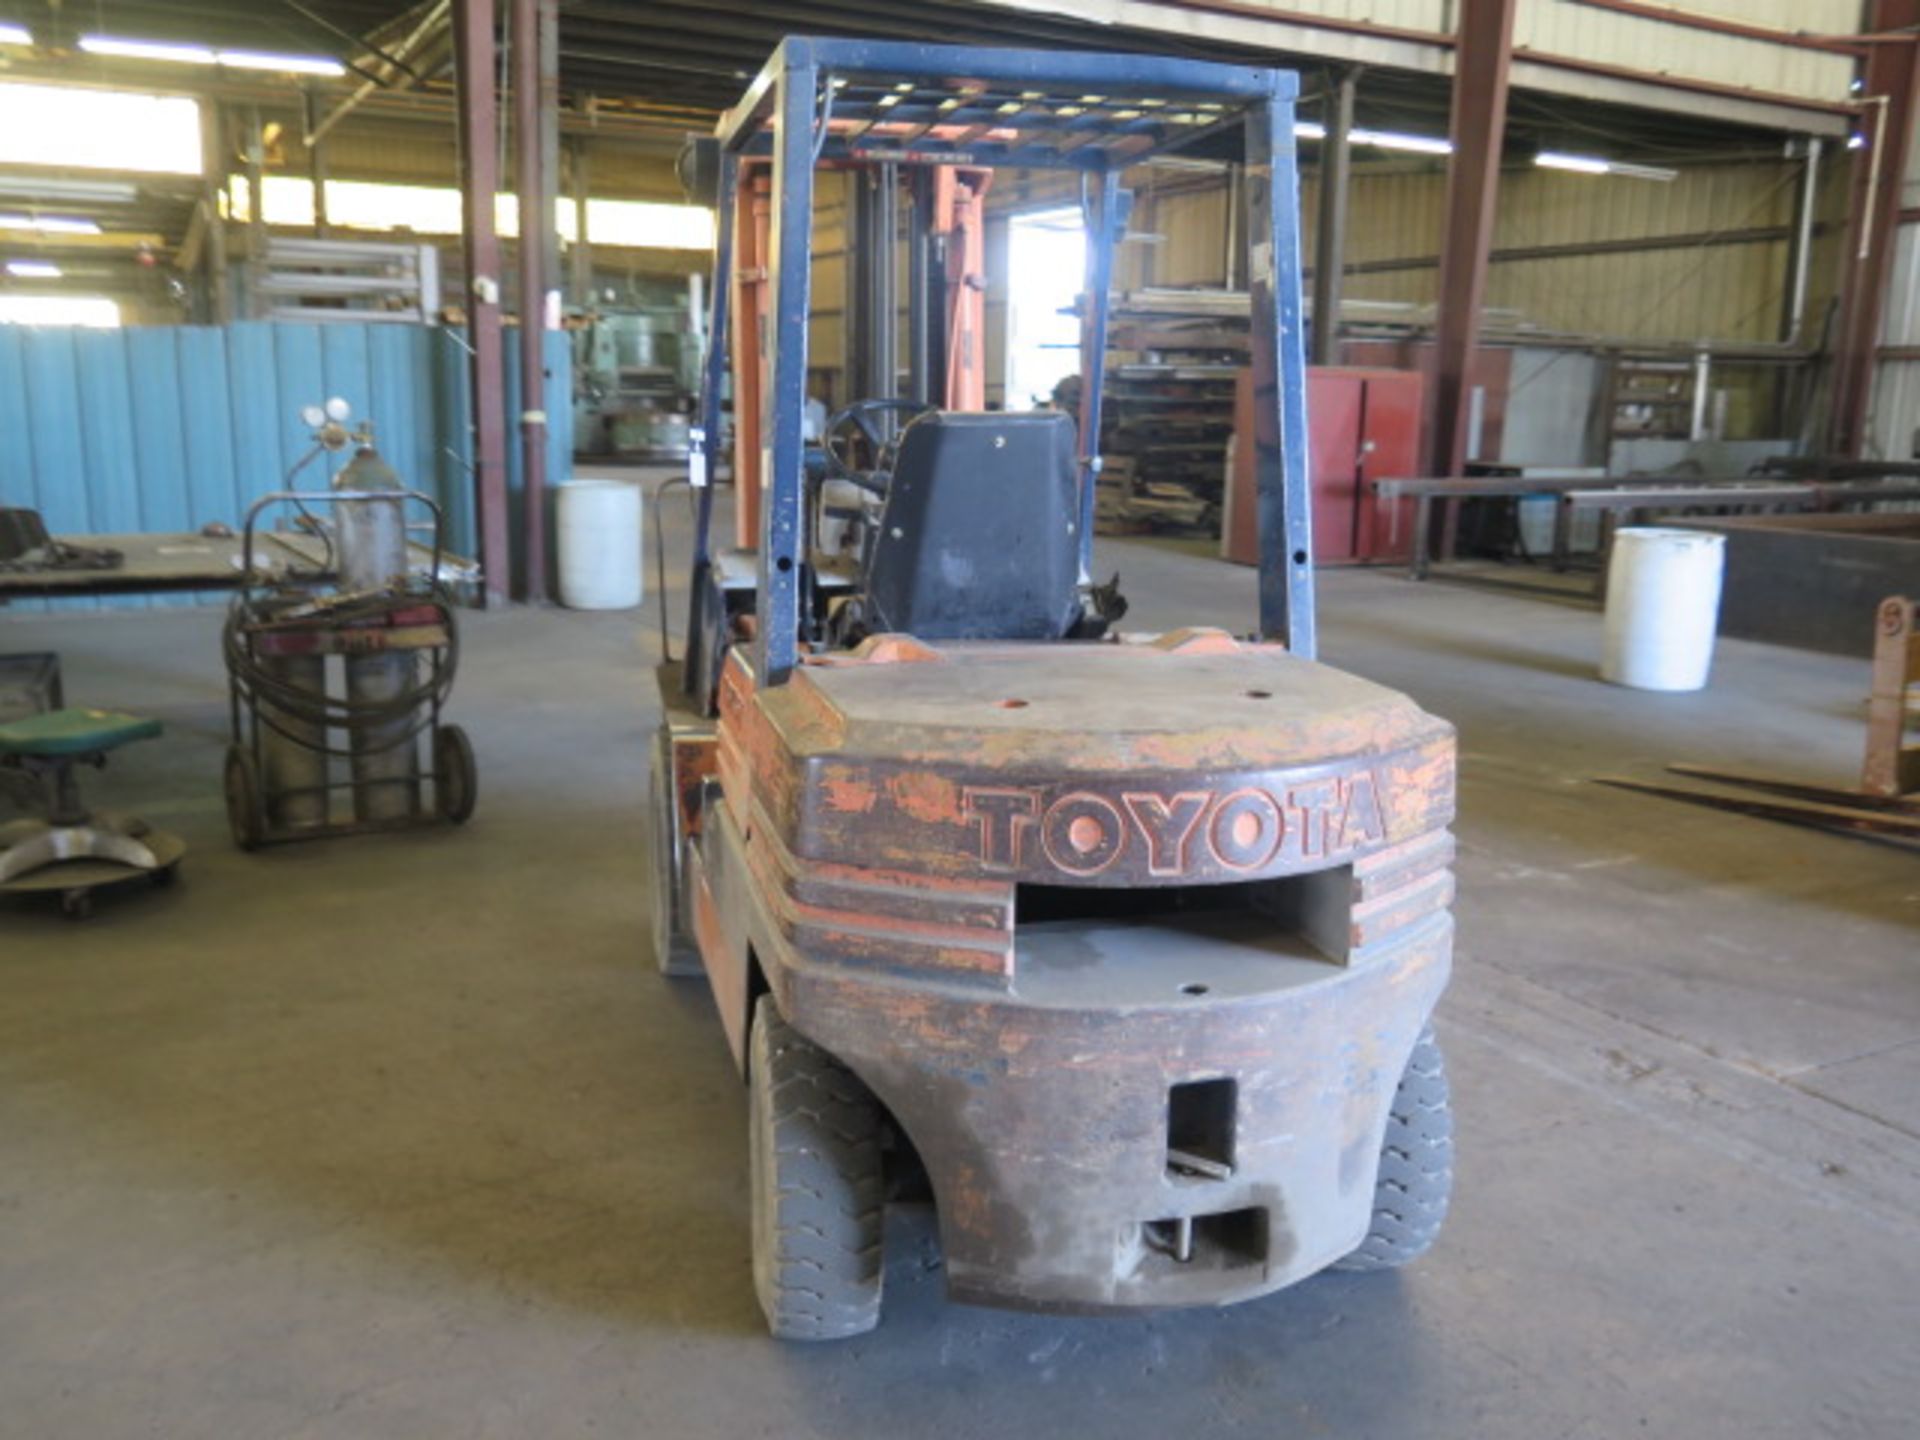 Toyota 02-5FG30 5800 Lb Cap Gas Powered Forklift s/n 70247 w/ 3-Stage,185” Lift height, SOLD AS IS - Image 2 of 11